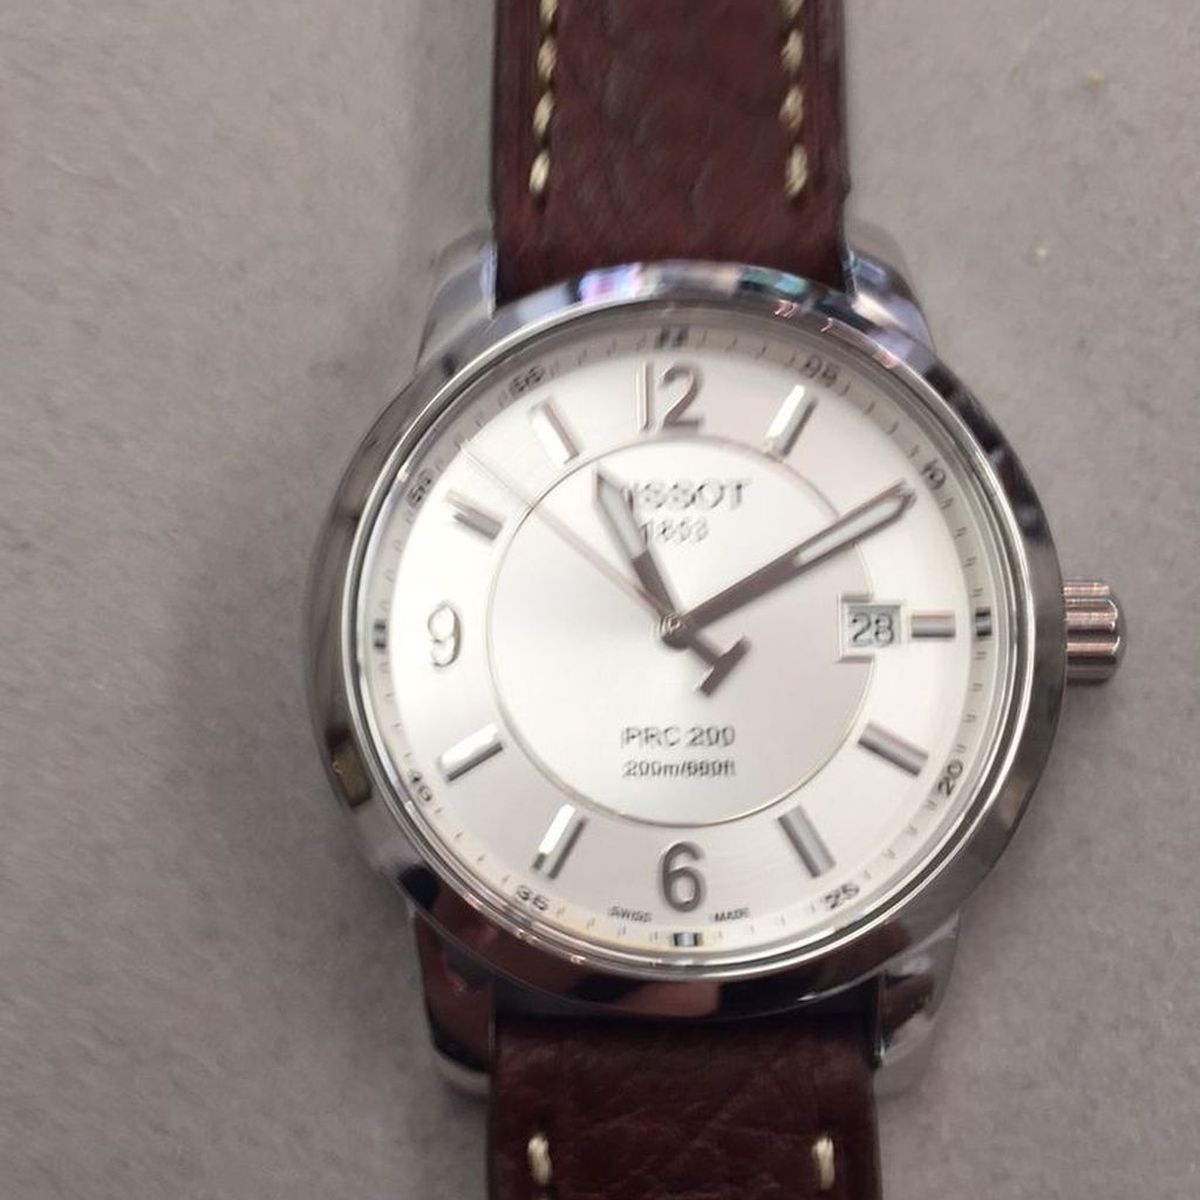 Get your Tissot watch repaired in Boston by best Tissot-trained watchmakers.